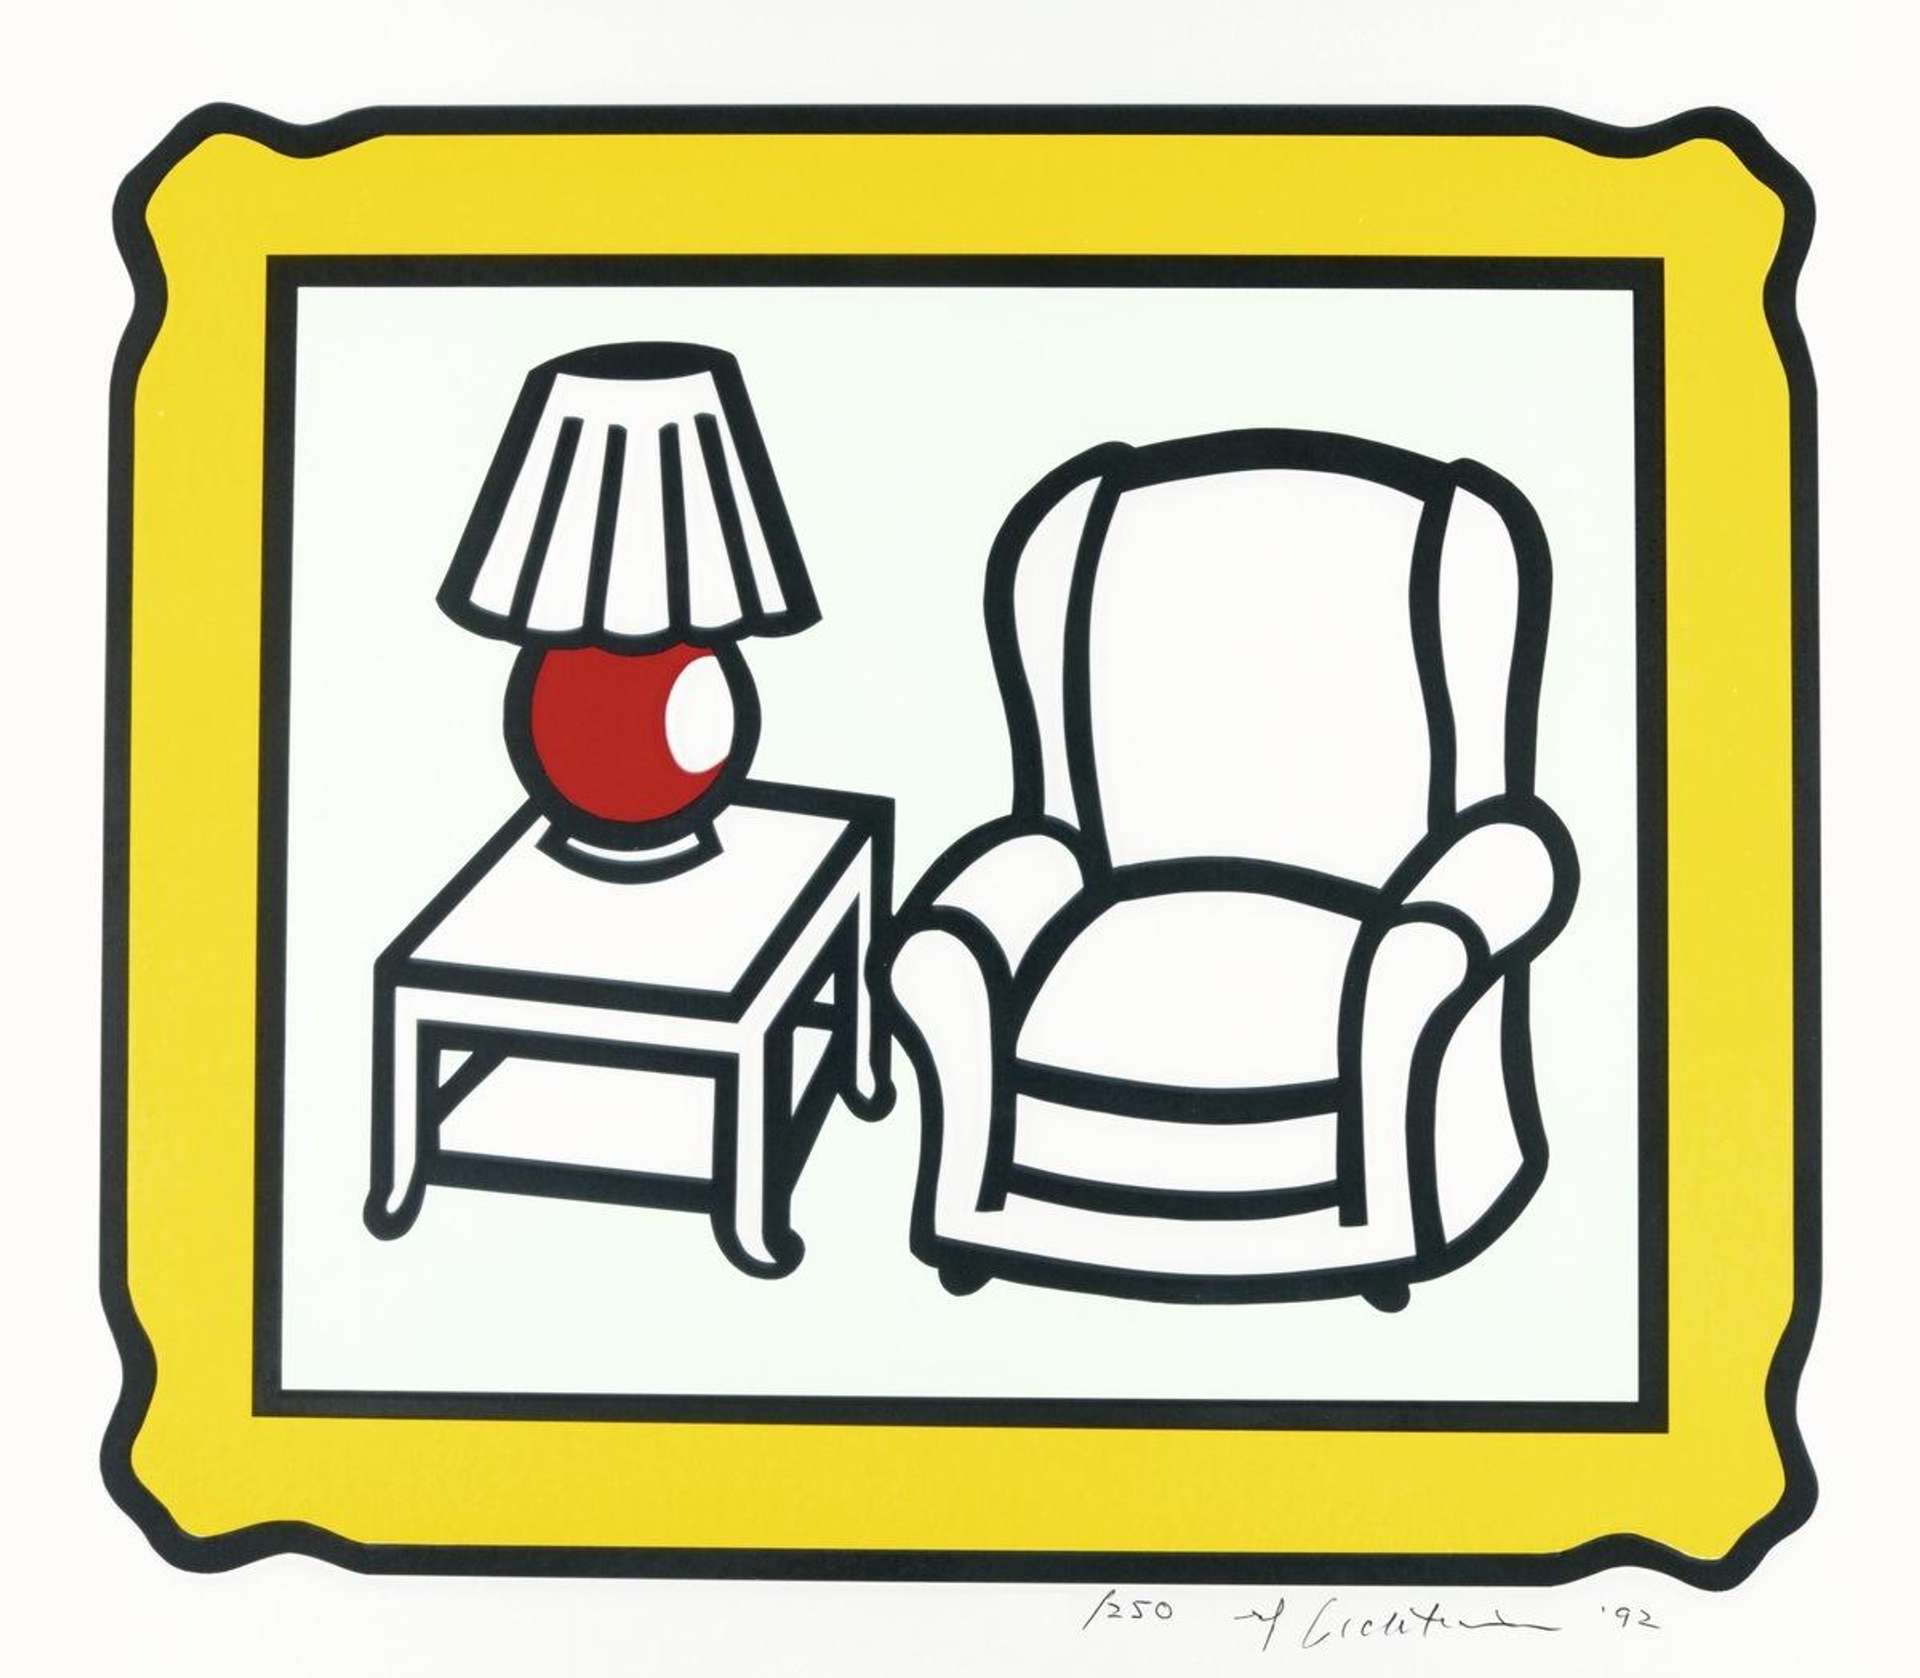 An illustration of a sofa chair and a table with a lamp featuring a black lamp base and a yellow lampshade. The lamp is framed by a hand-drawn yellow picture frame.